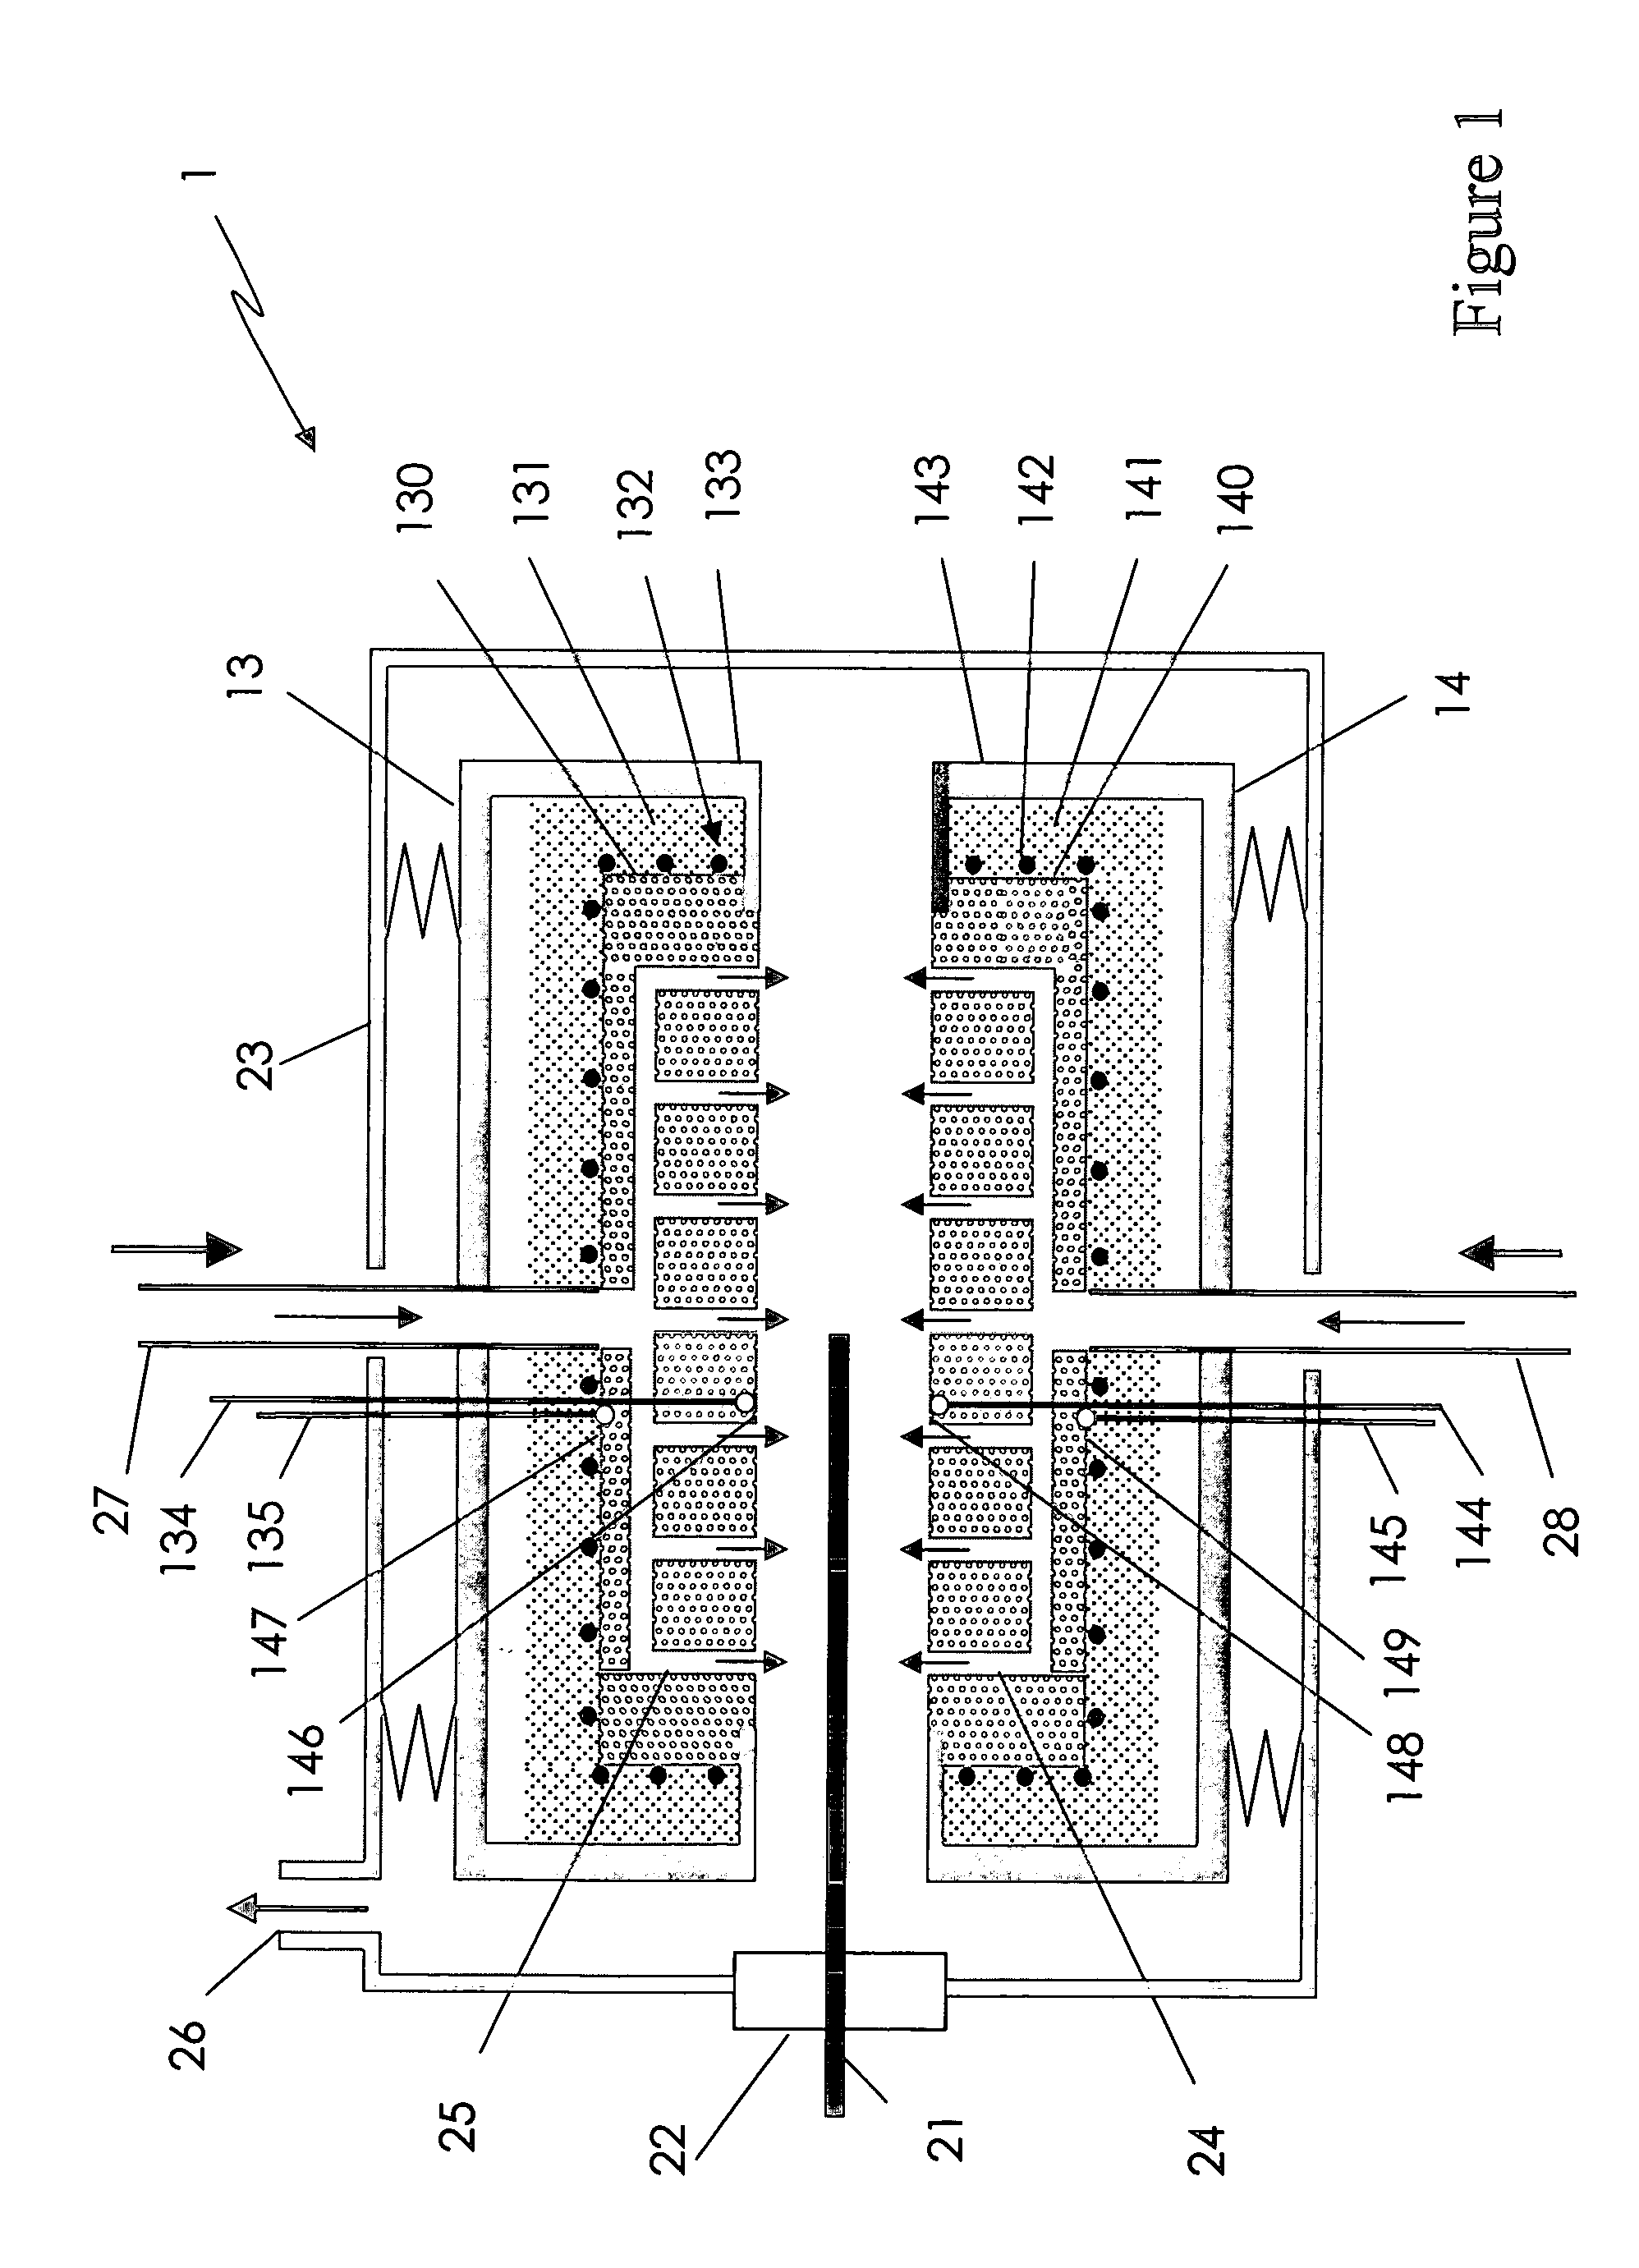 Heat treatment apparatus with temperature control system